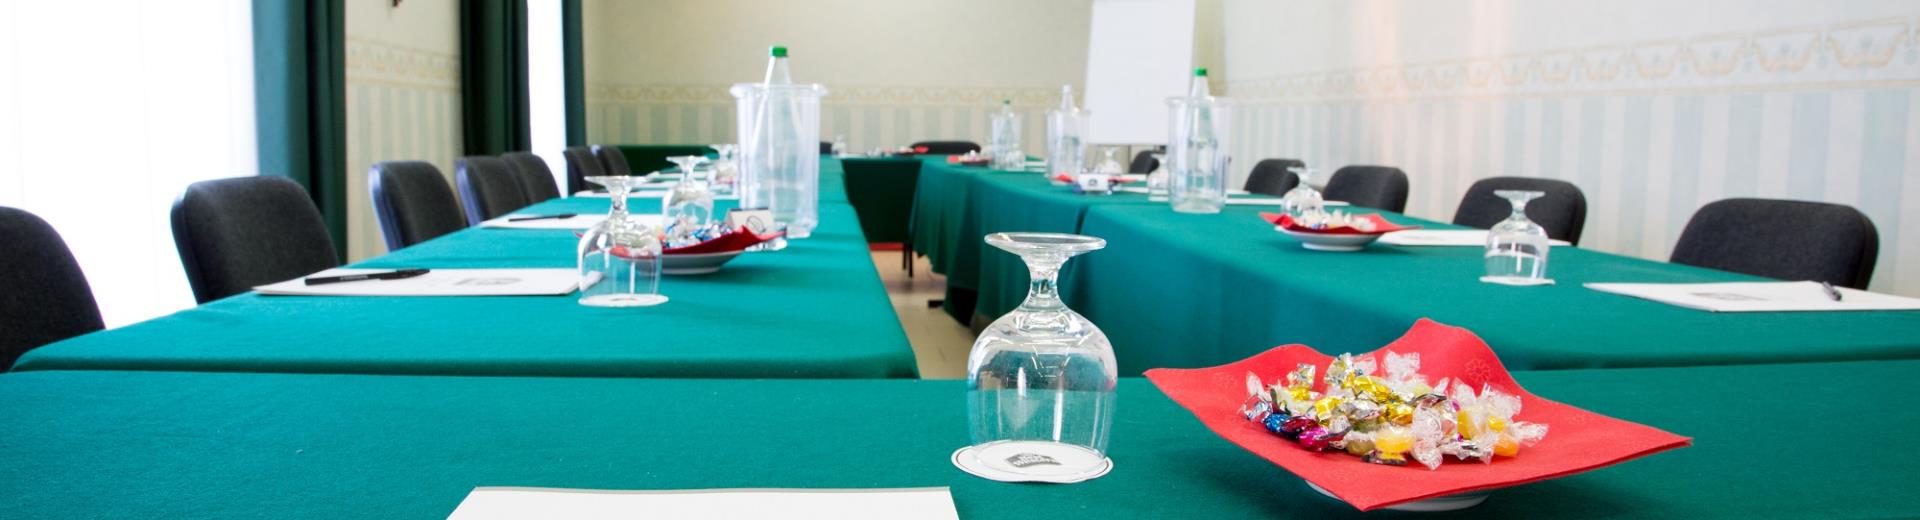 Meeting rooms of the Hotel San Donato Bologna